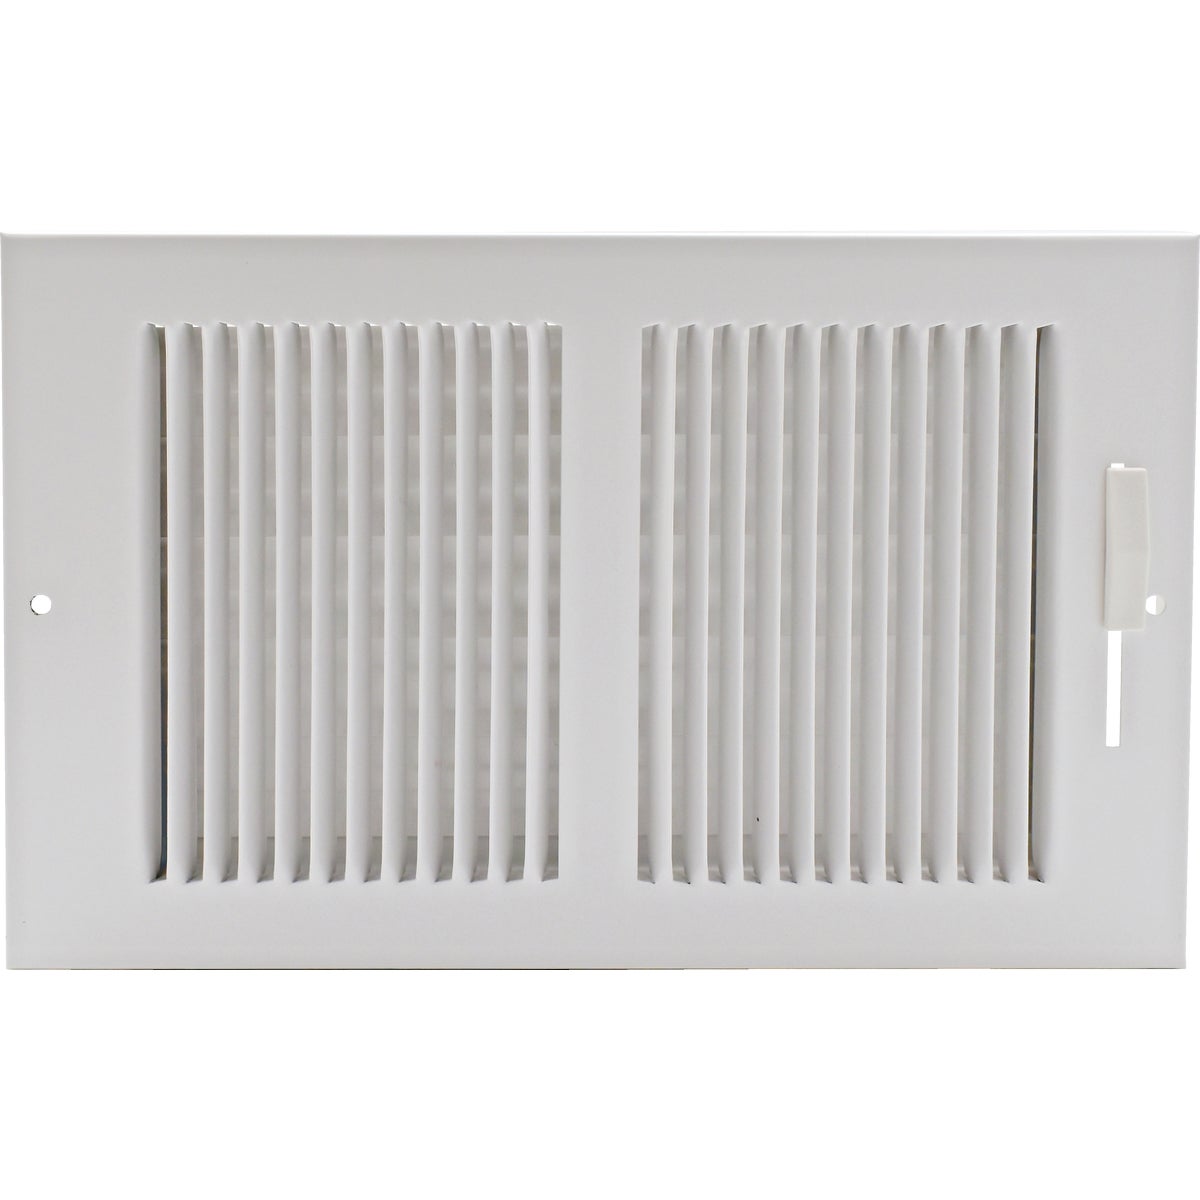 Accord 10 In. x 6 In. White Wall Register